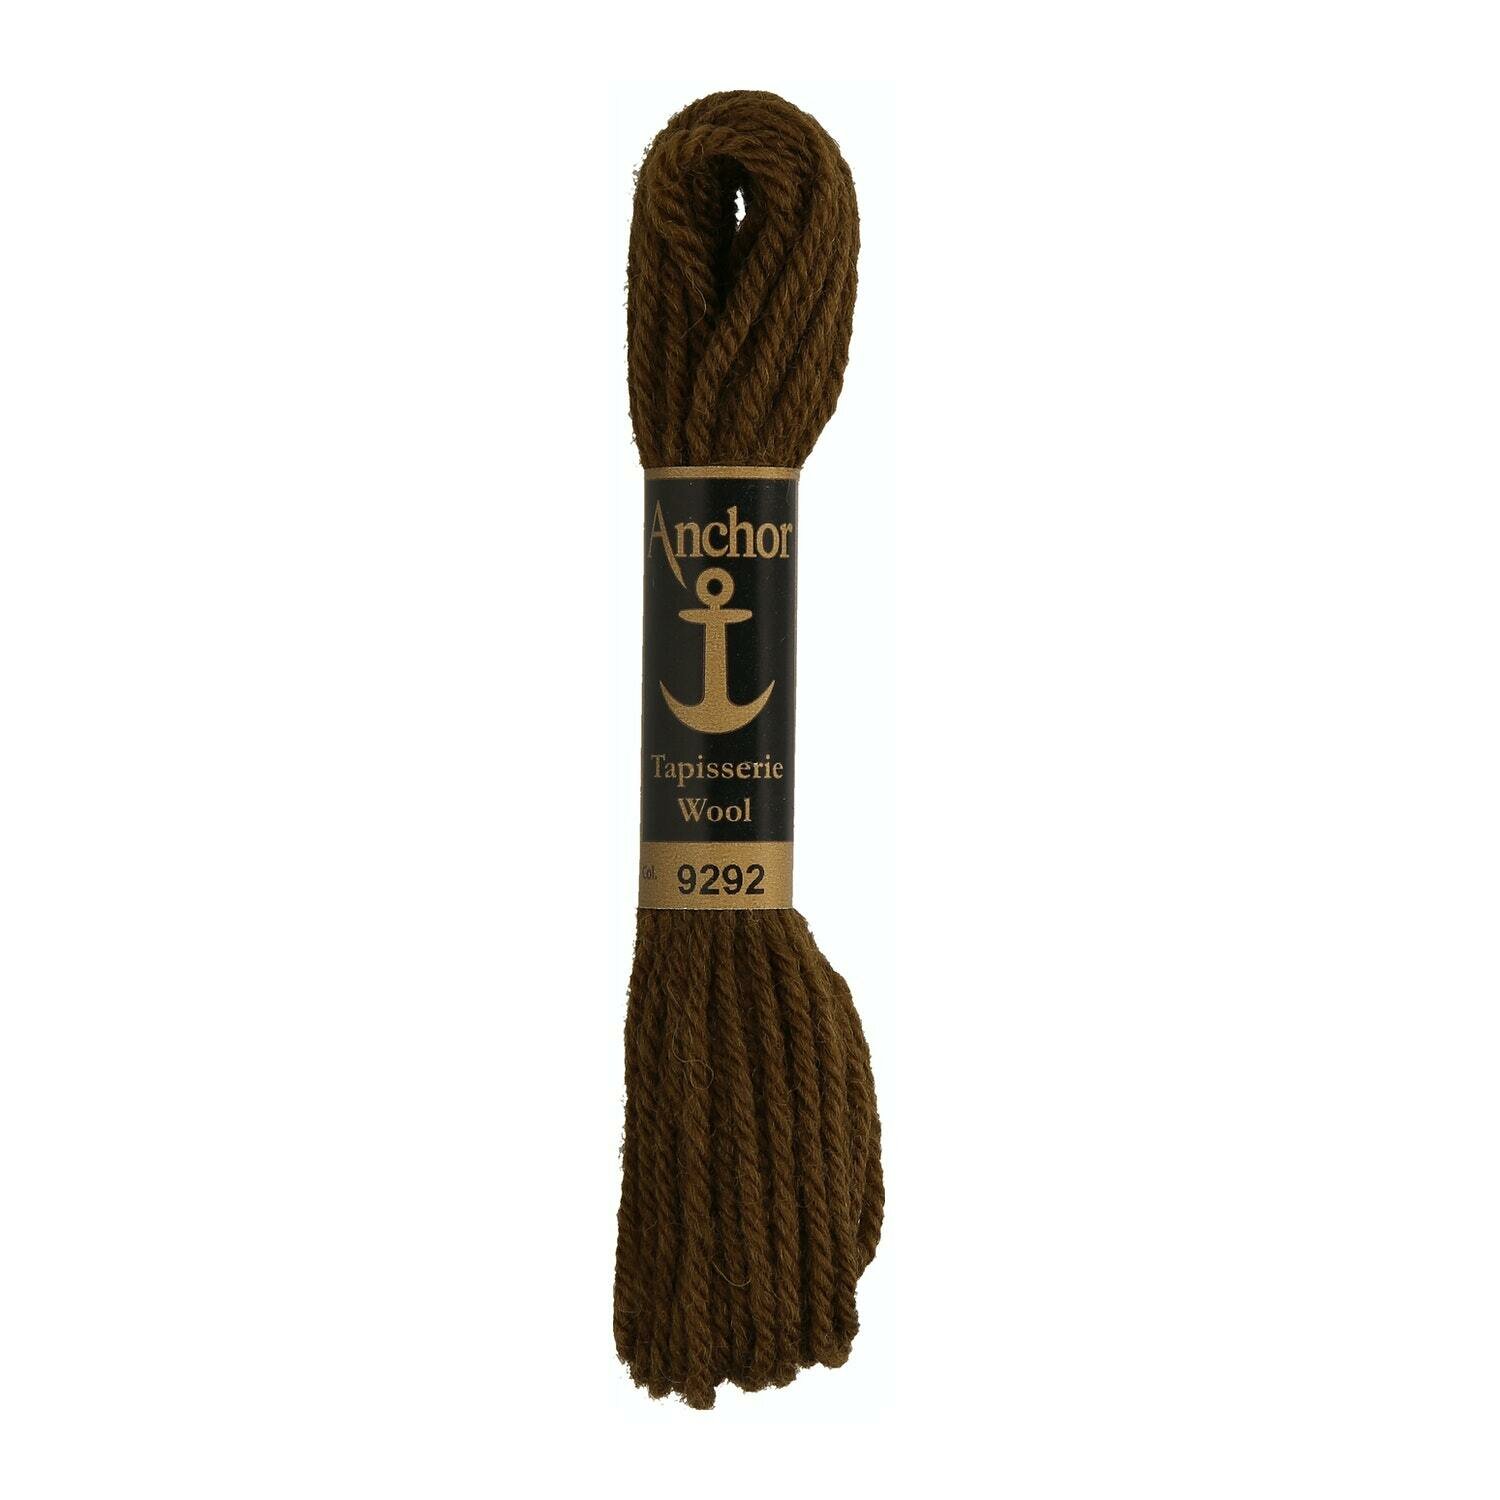 Anchor Tapisserie Wool # 09292